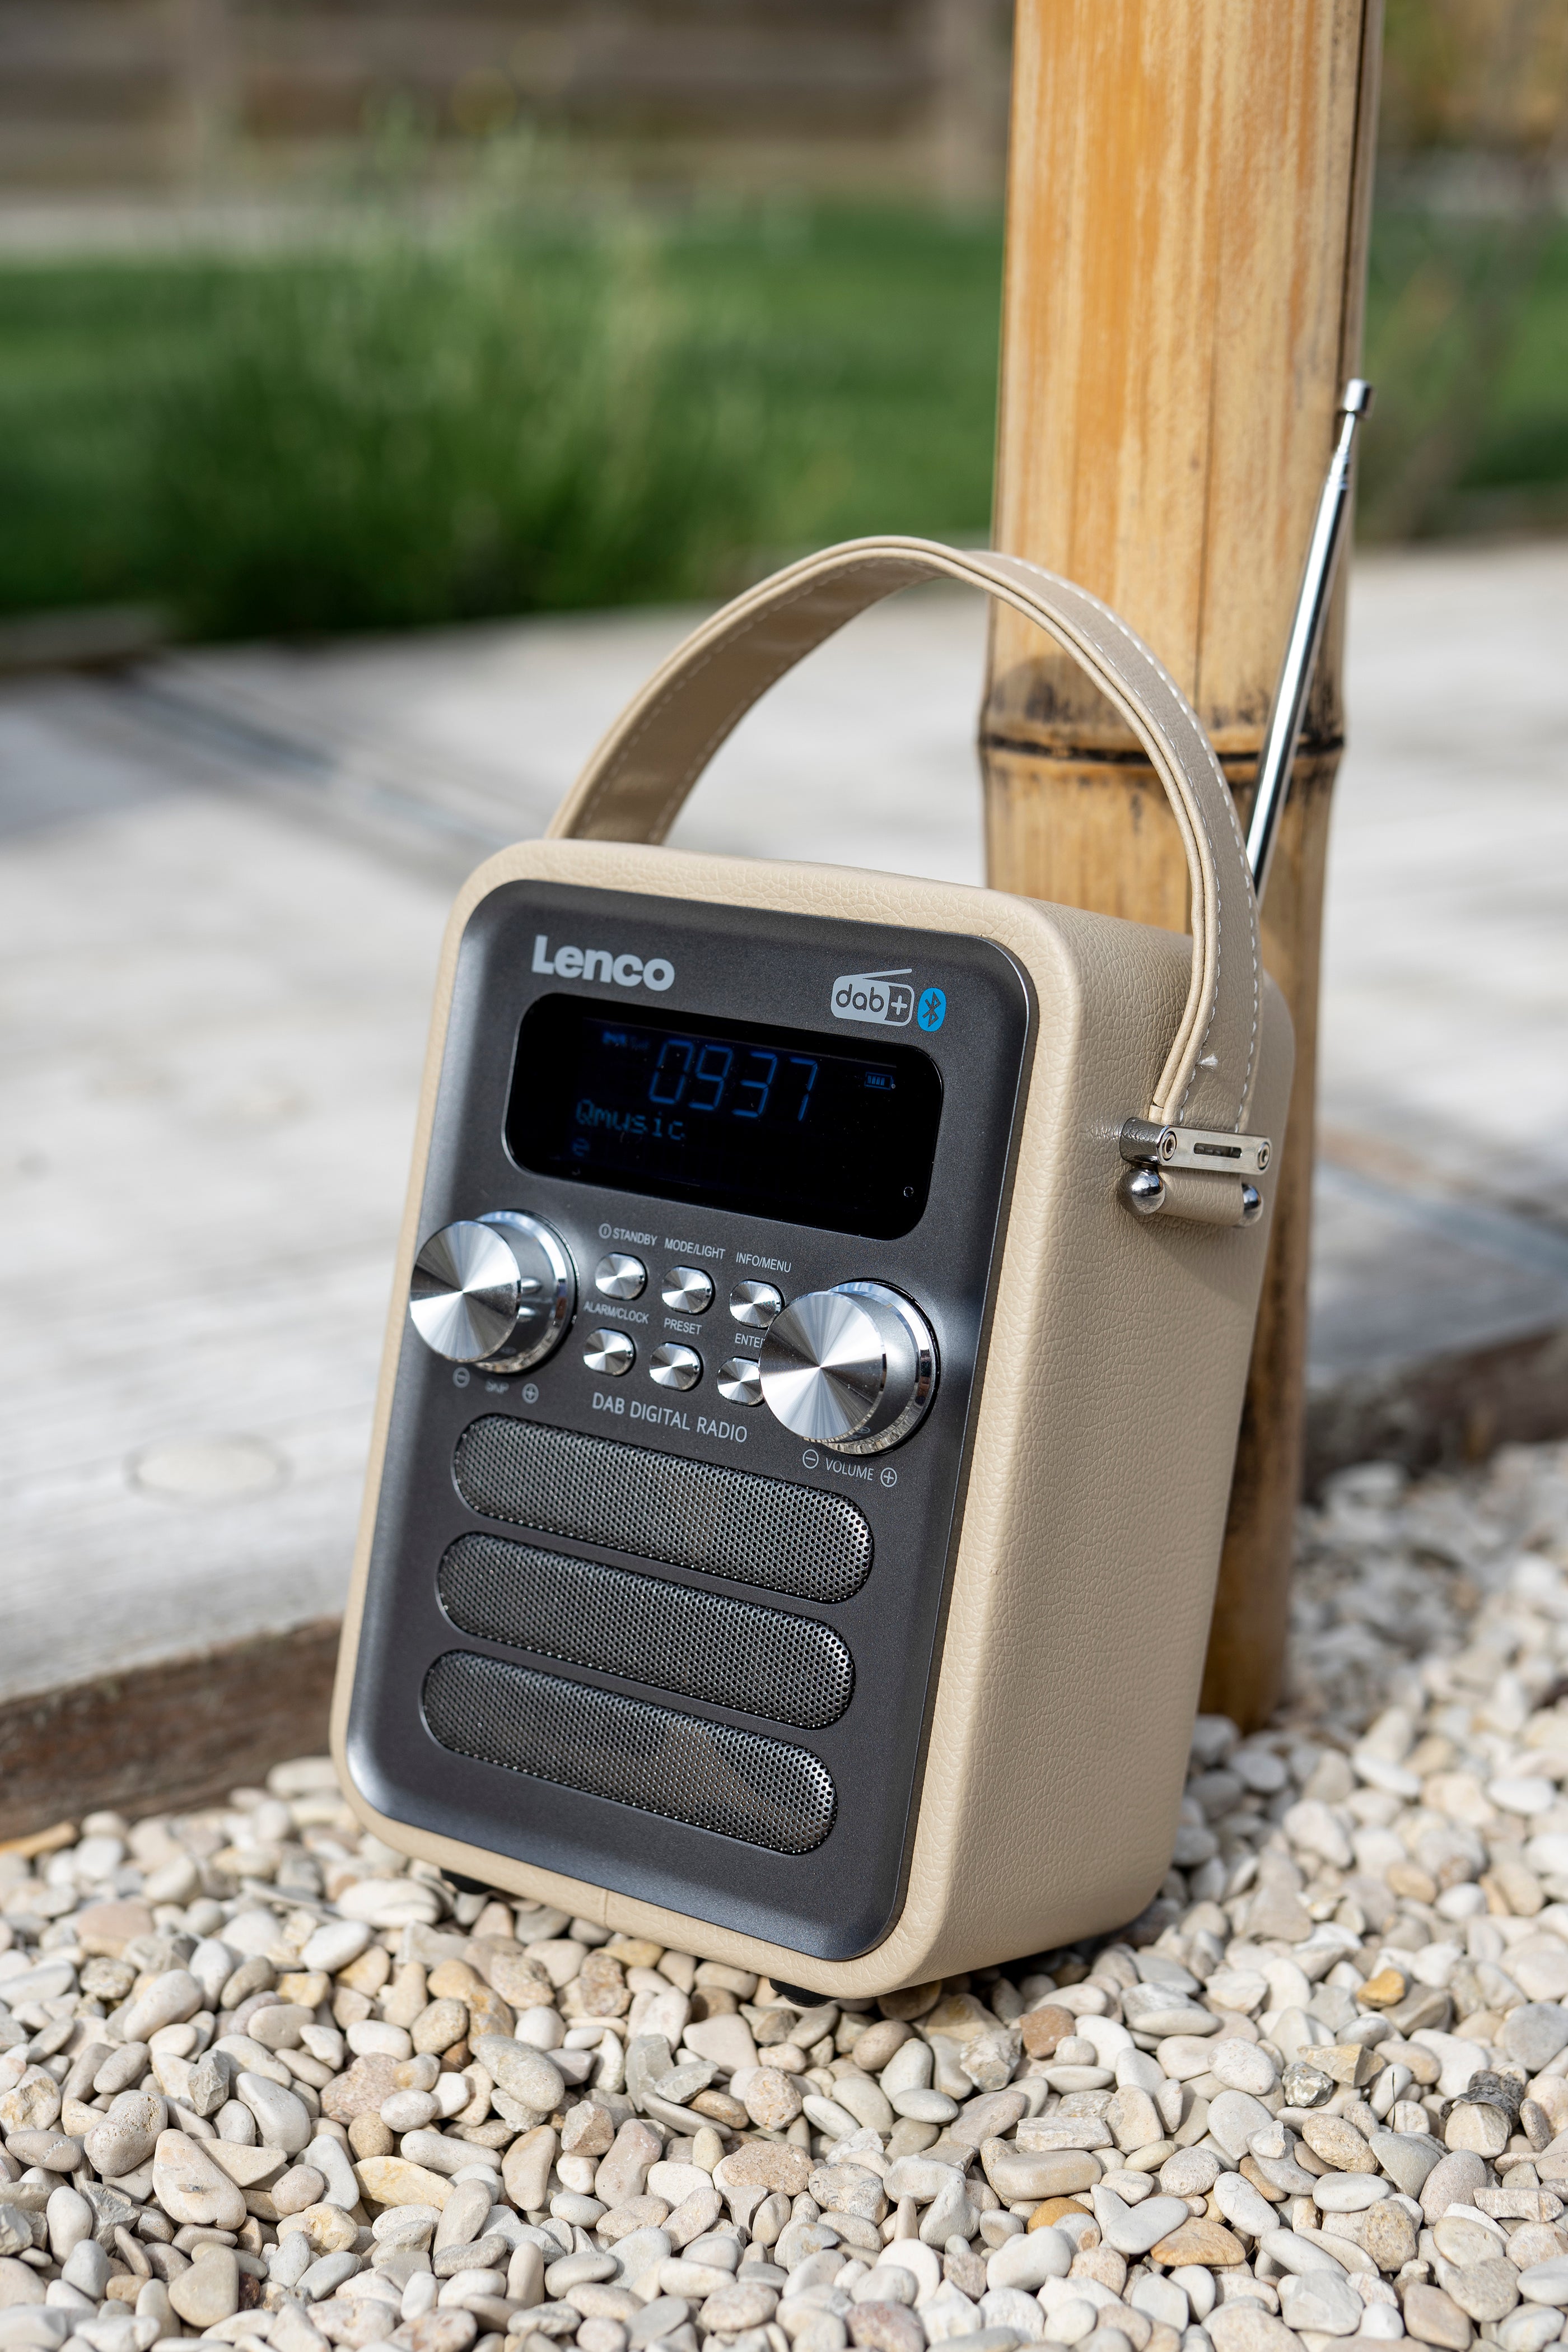 Radios from Lenco! Now shop official the in